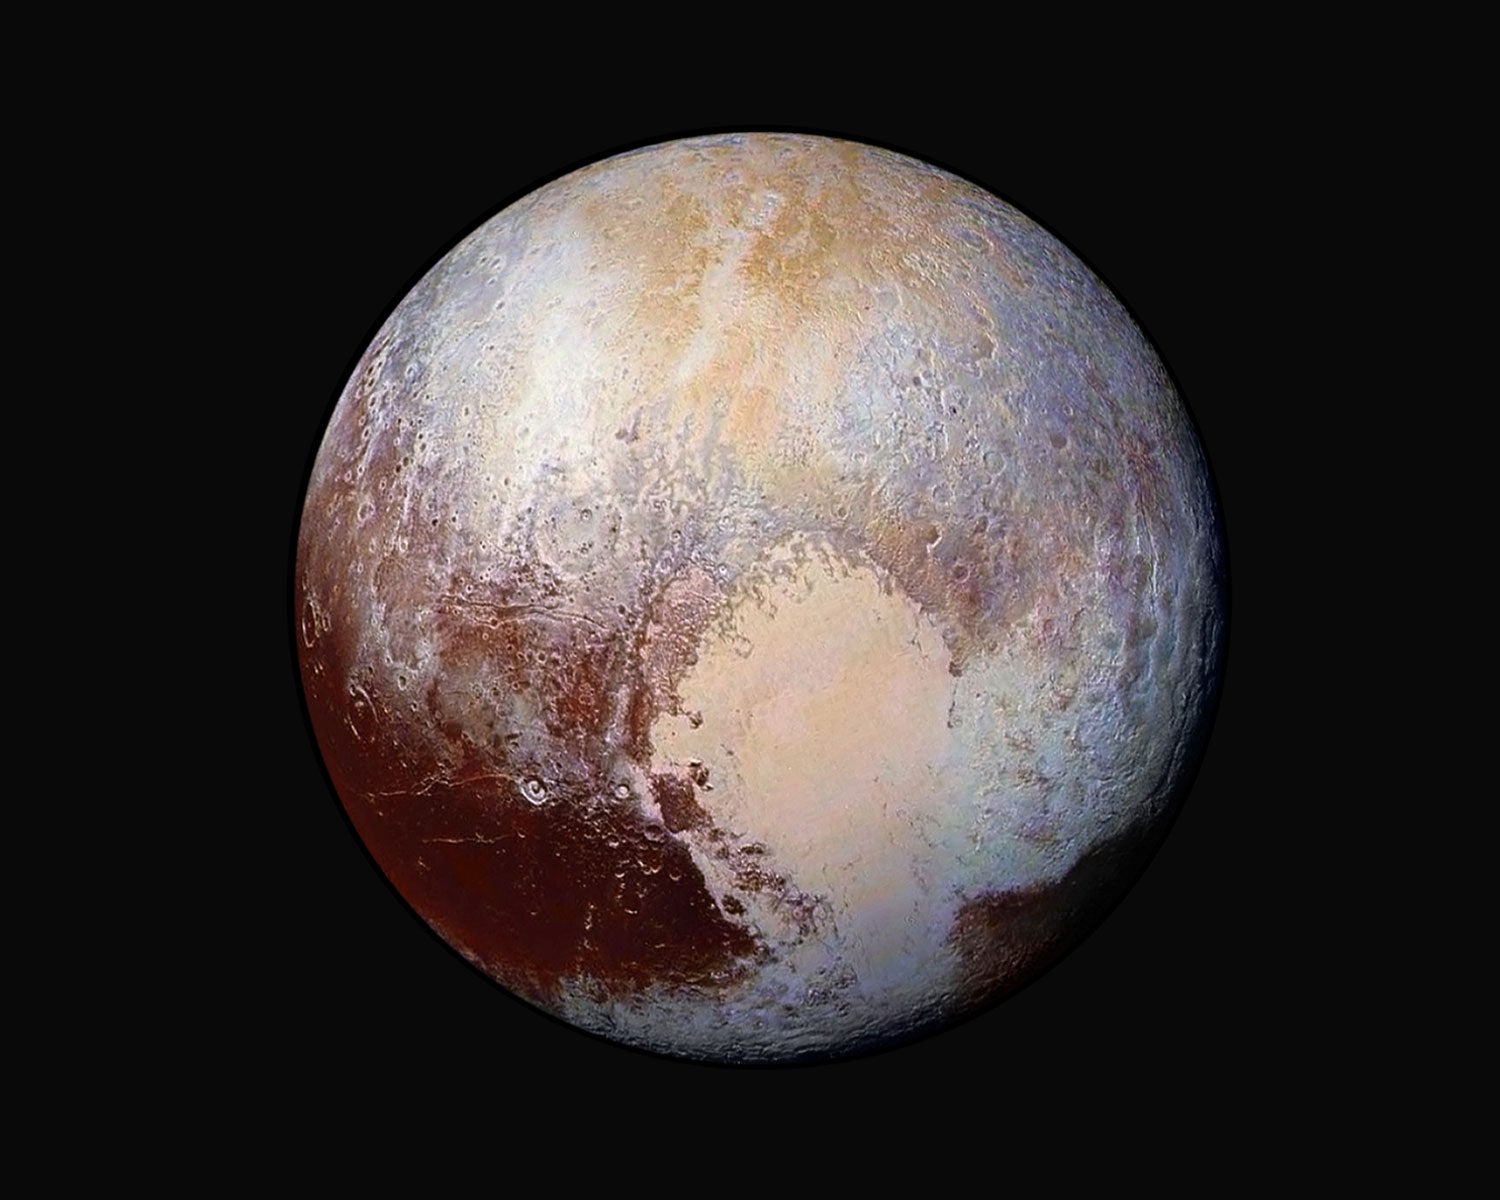 NASA's New Horizons spacecraft captured this high-resolution enhanced color view of Pluto